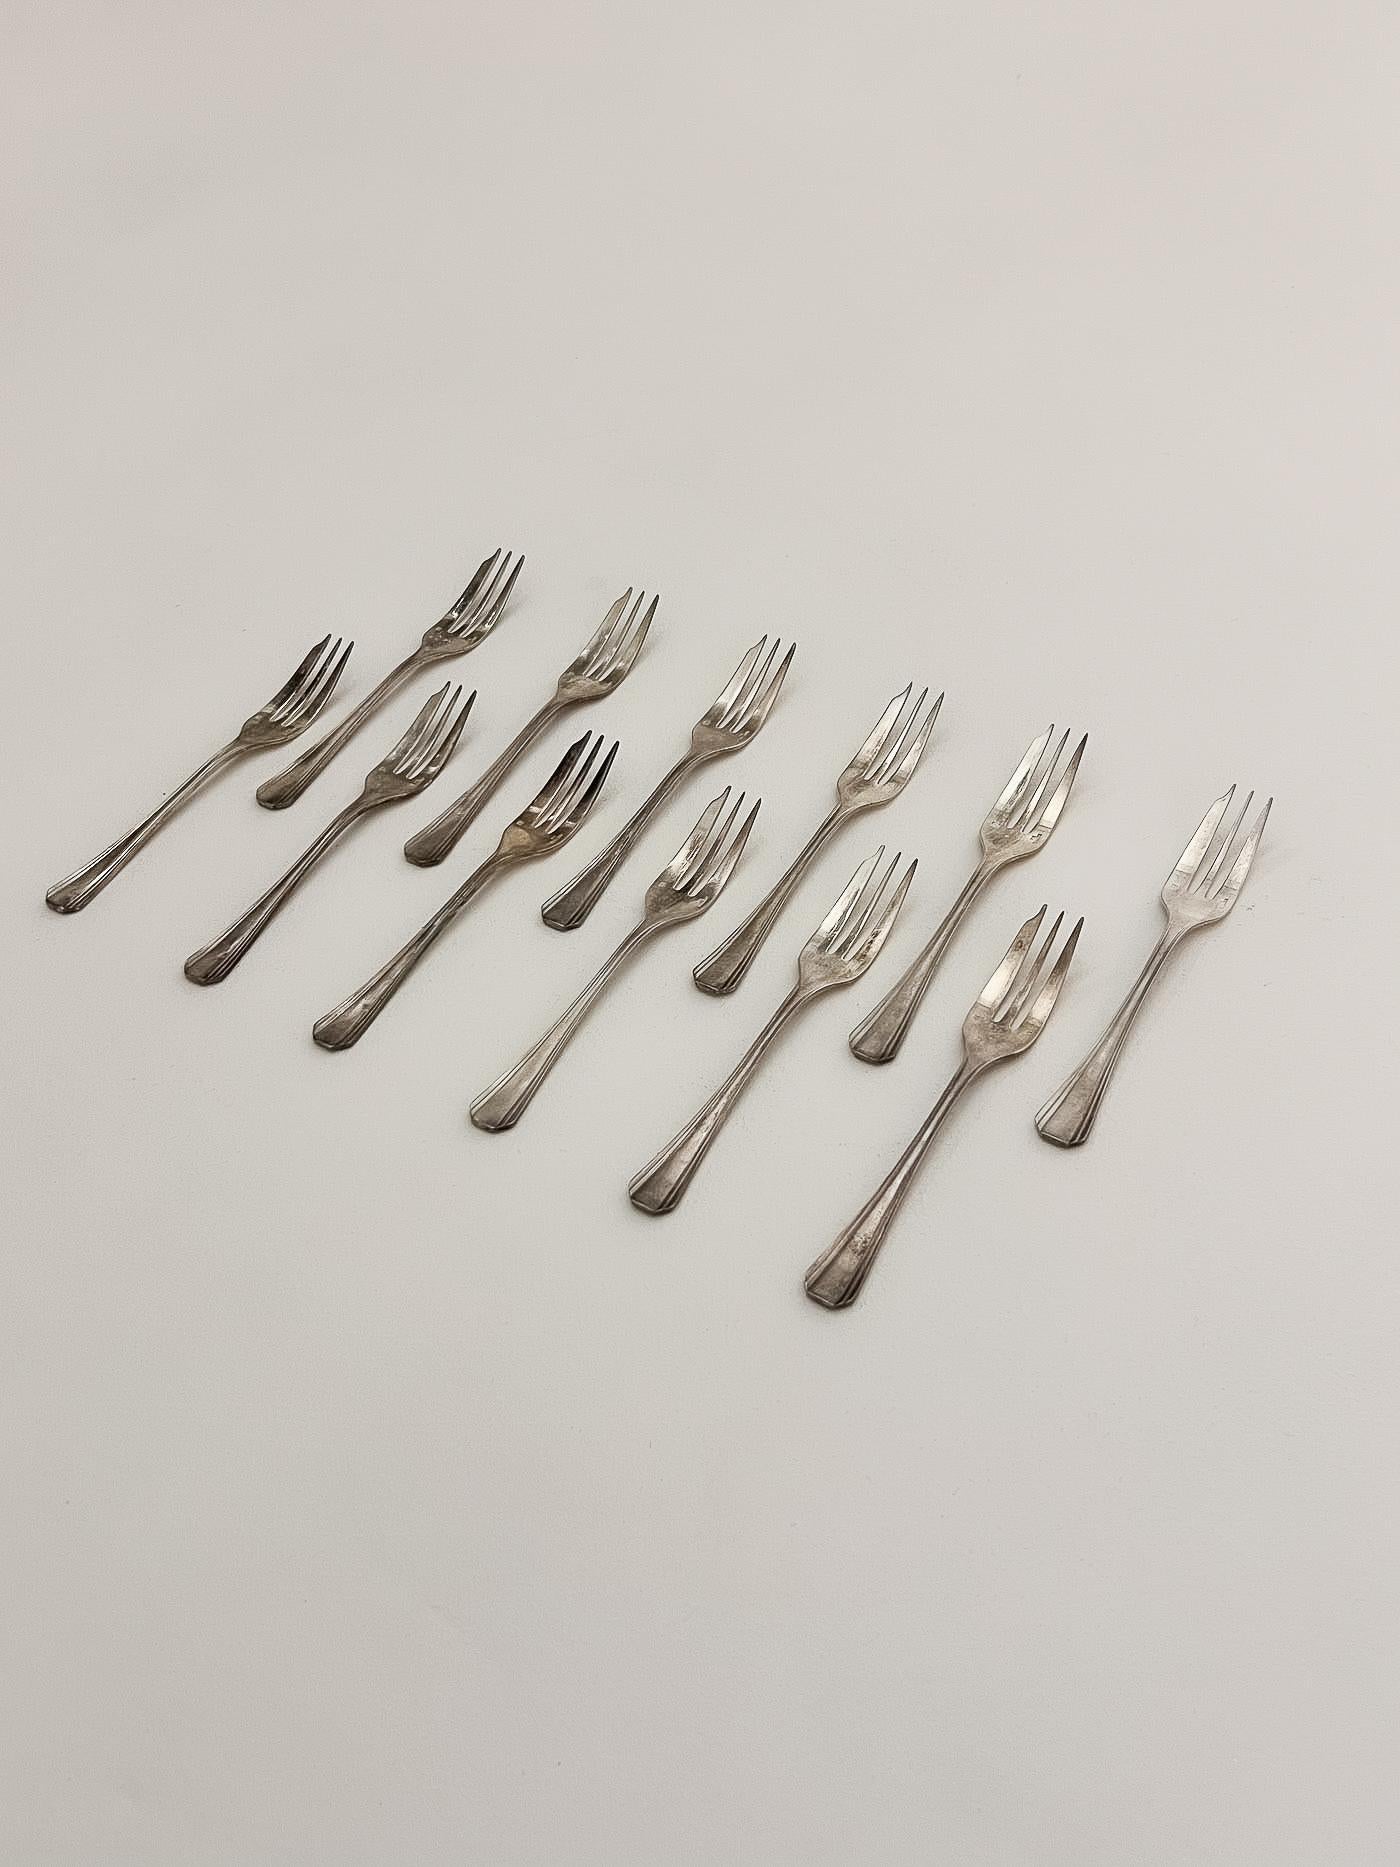 Set of twelve silver-plated oyster forks from Christofle. Very good condition.
LP2155